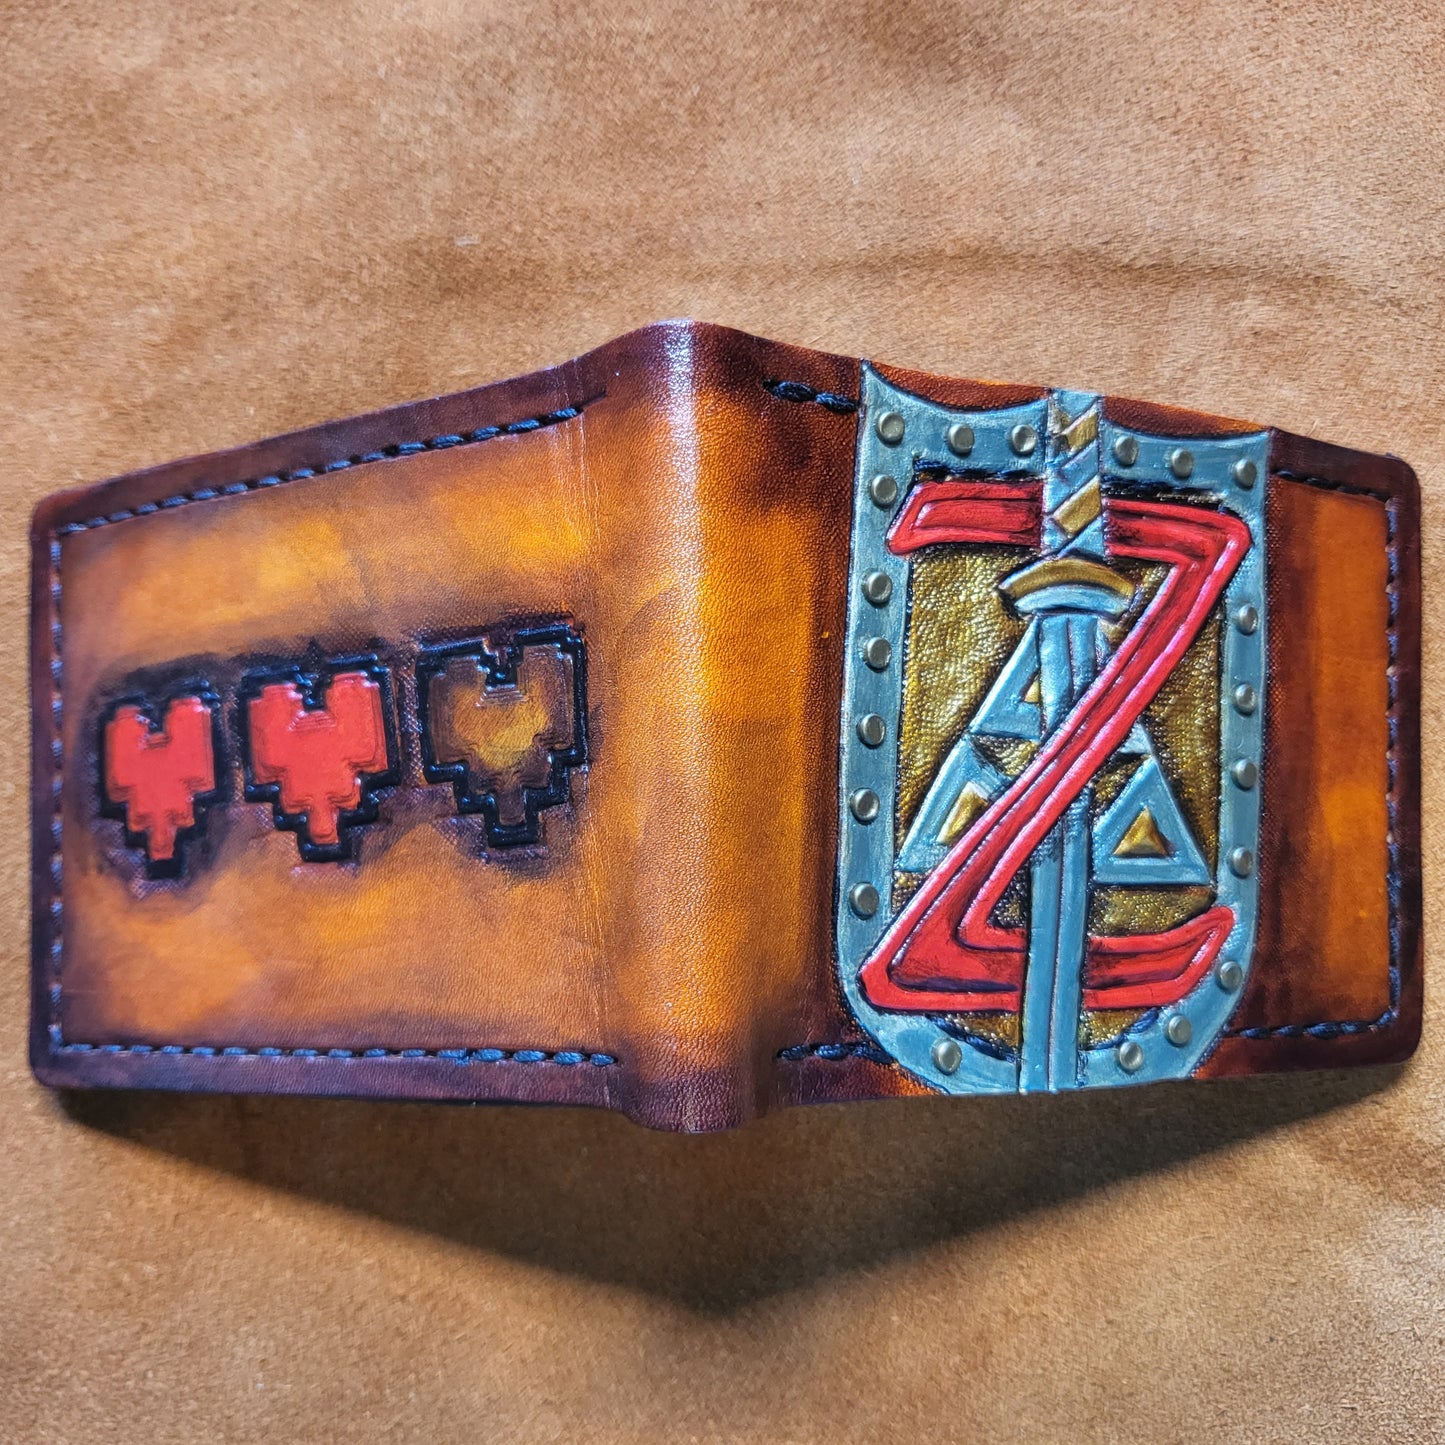 Hyrule Shield and Heart containers leather wallet- Leather Bifold Wallet - Handcrafted Legend of Zelda Wallet - Link Wallet